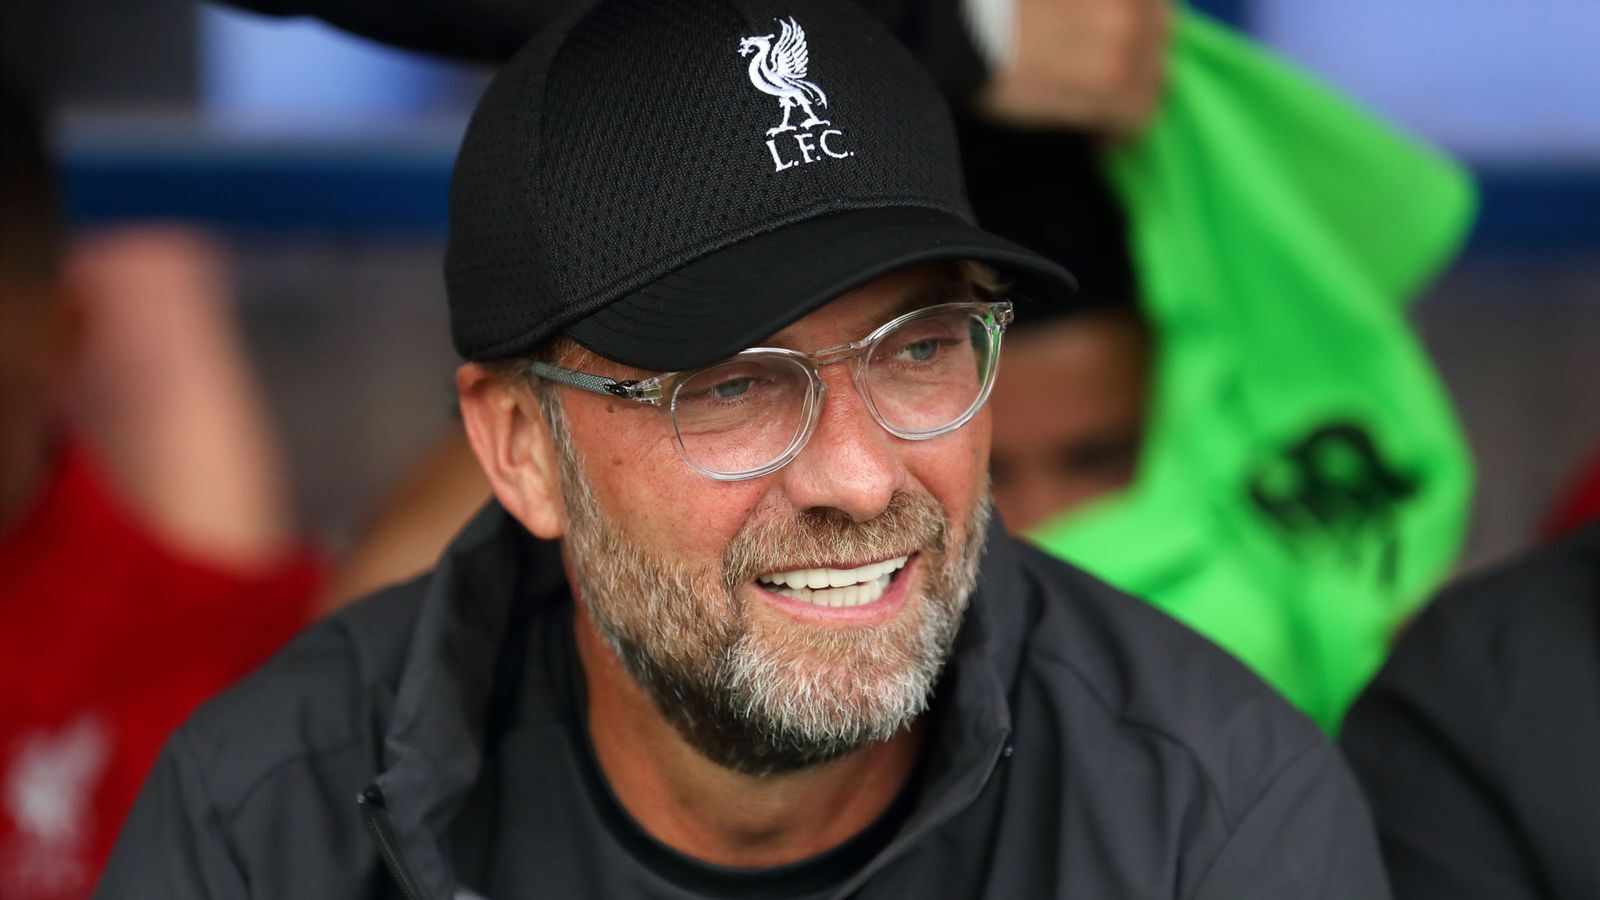 Jürgen Klopp: the club will look to promote more youth instead of spendingstead  